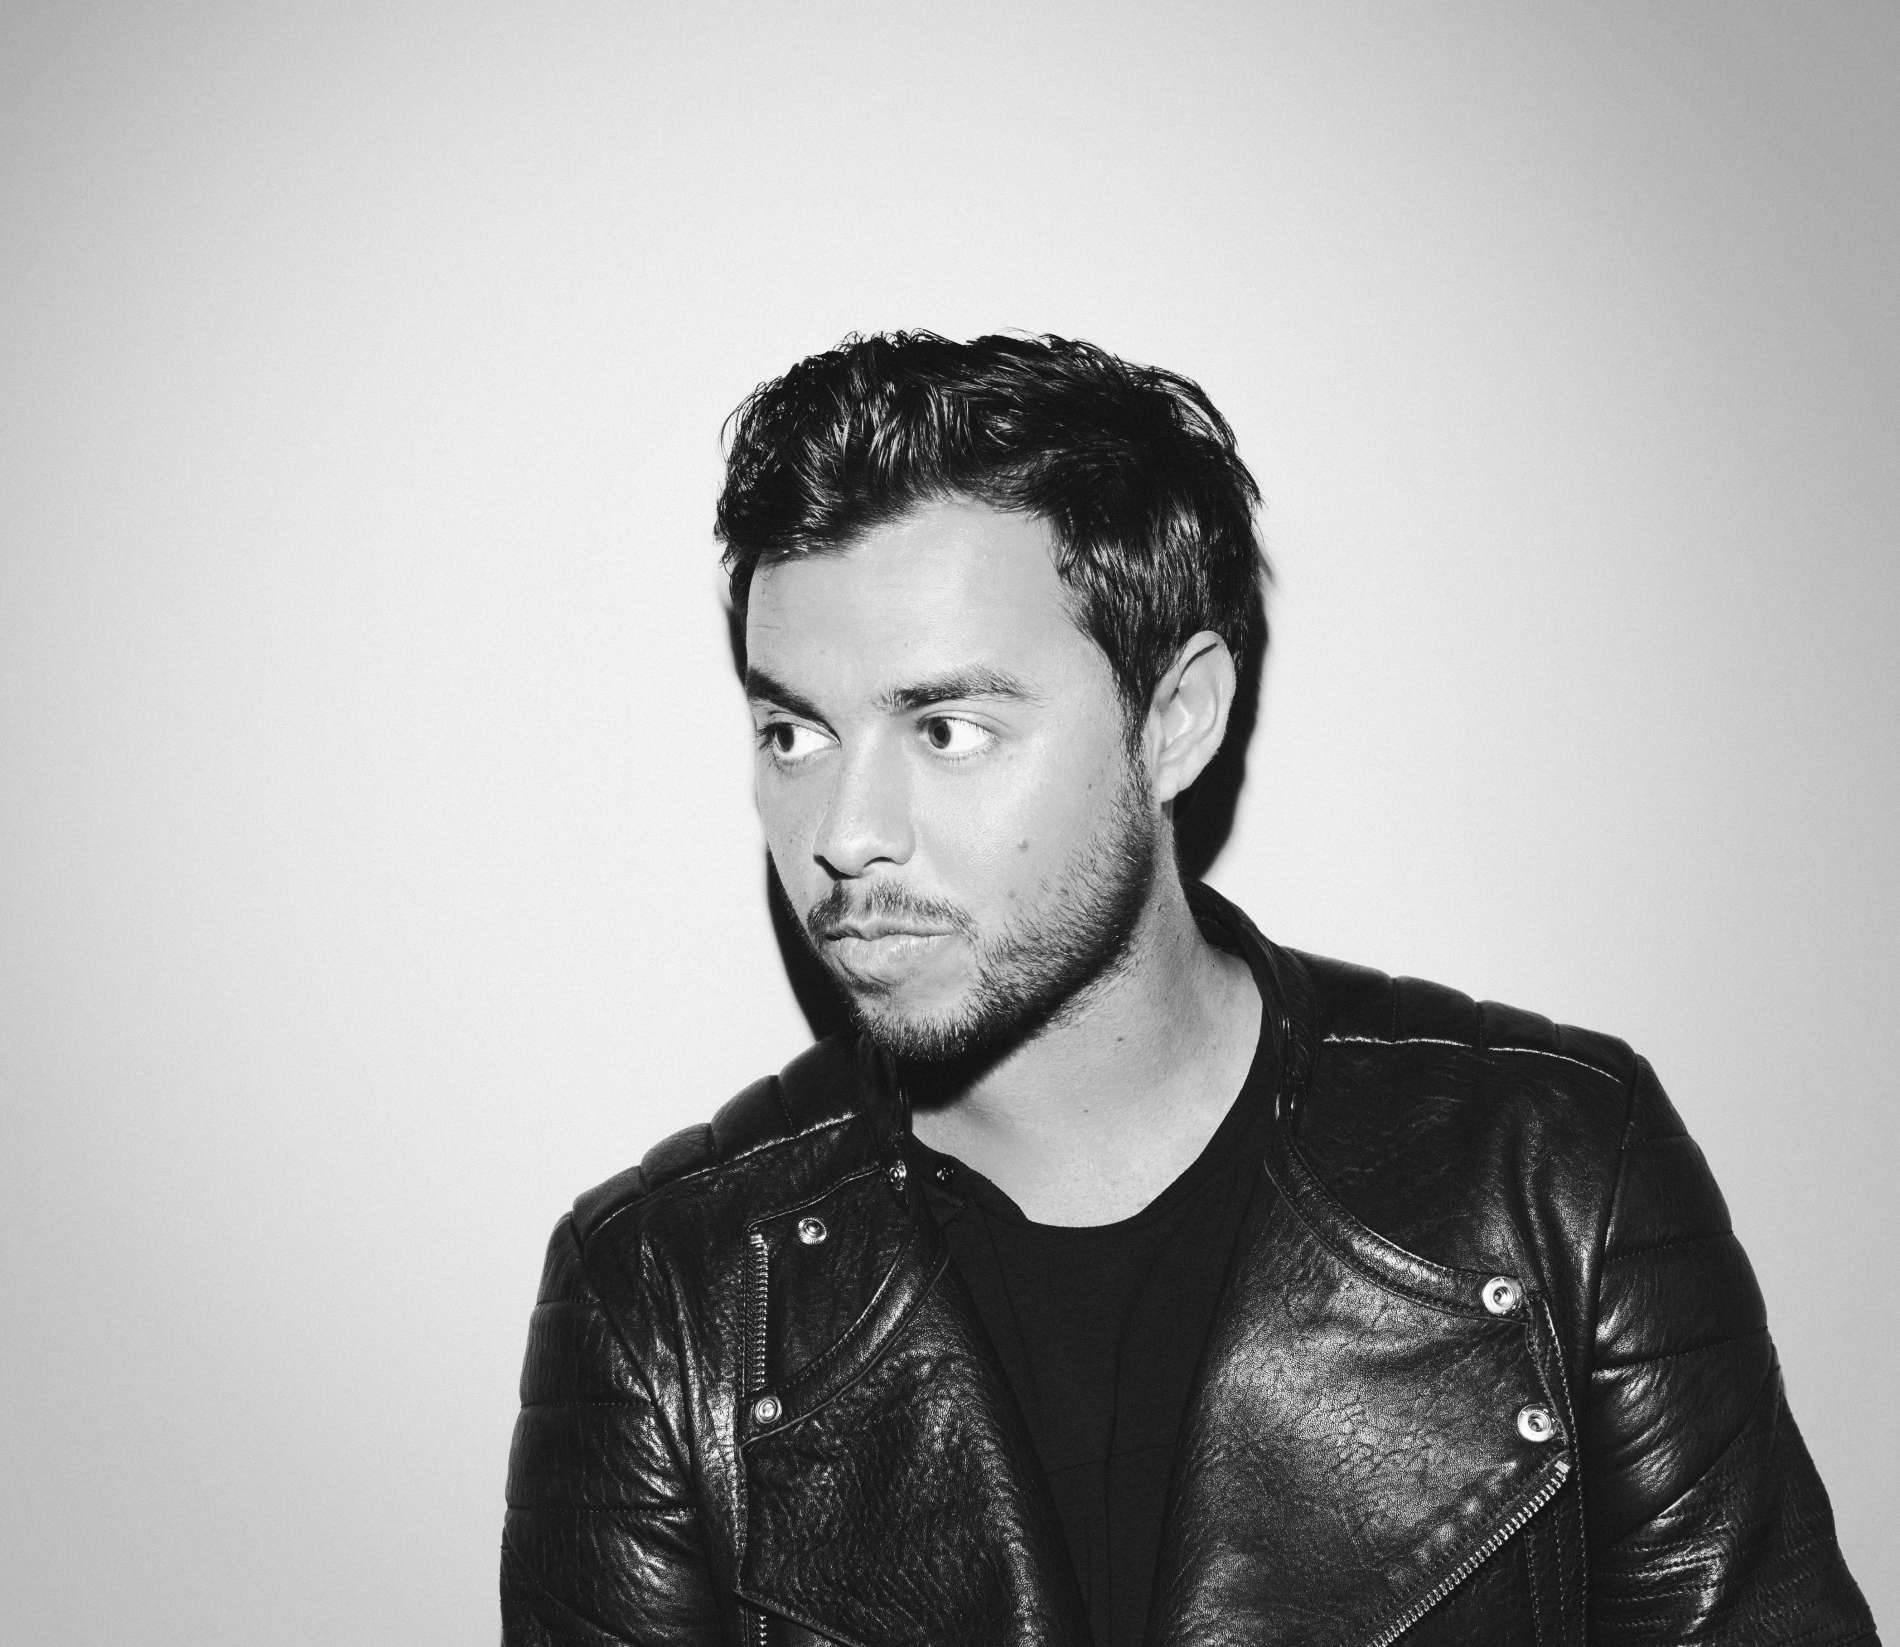 Free Download! Quintino delivers his edit of 'Raptor'